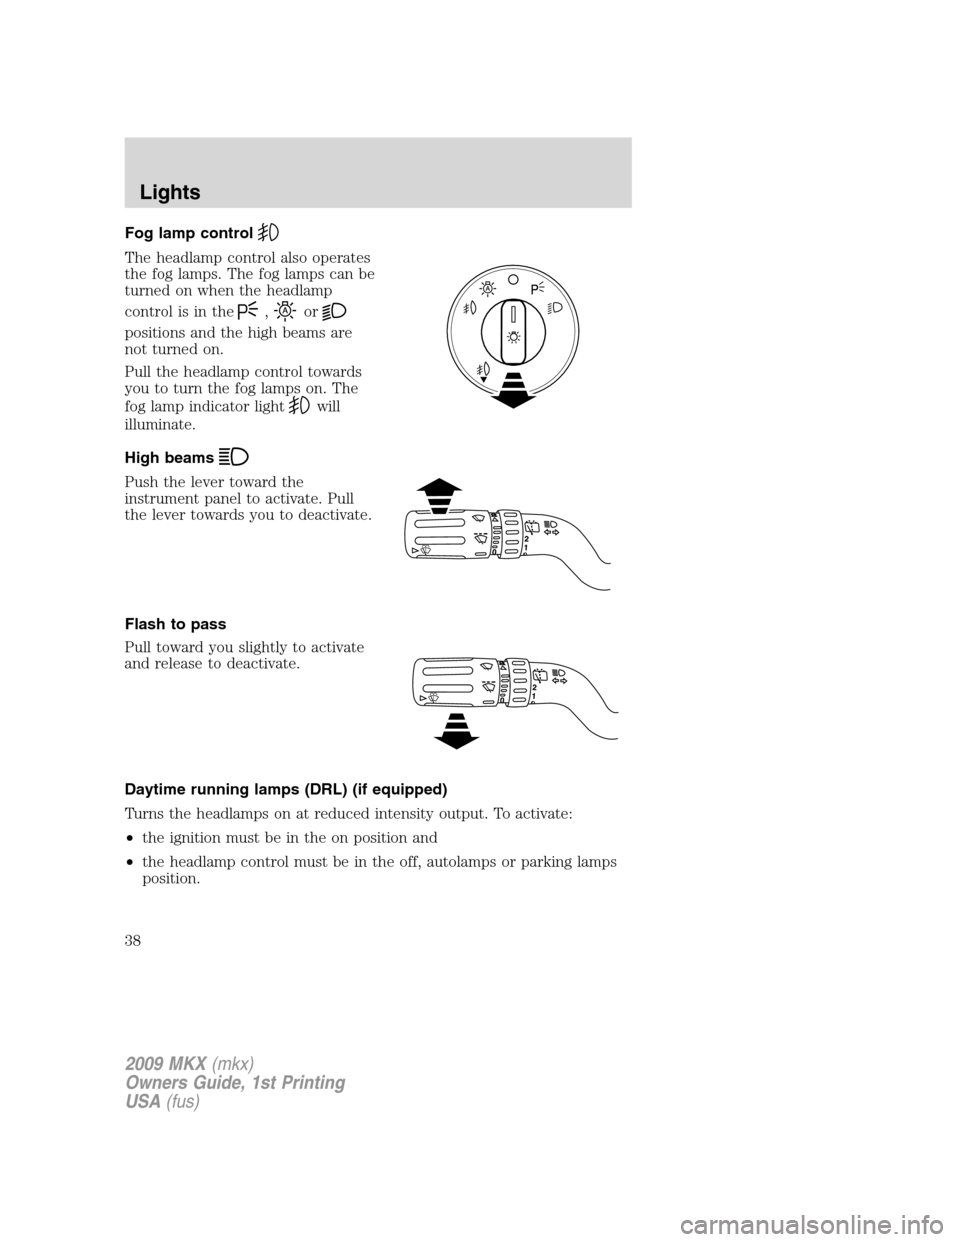 LINCOLN MKX 2009  Owners Manual Fog lamp control
The headlamp control also operates
the fog lamps. The fog lamps can be
turned on when the headlamp
control is in the
,or
positions and the high beams are
not turned on.
Pull the headl